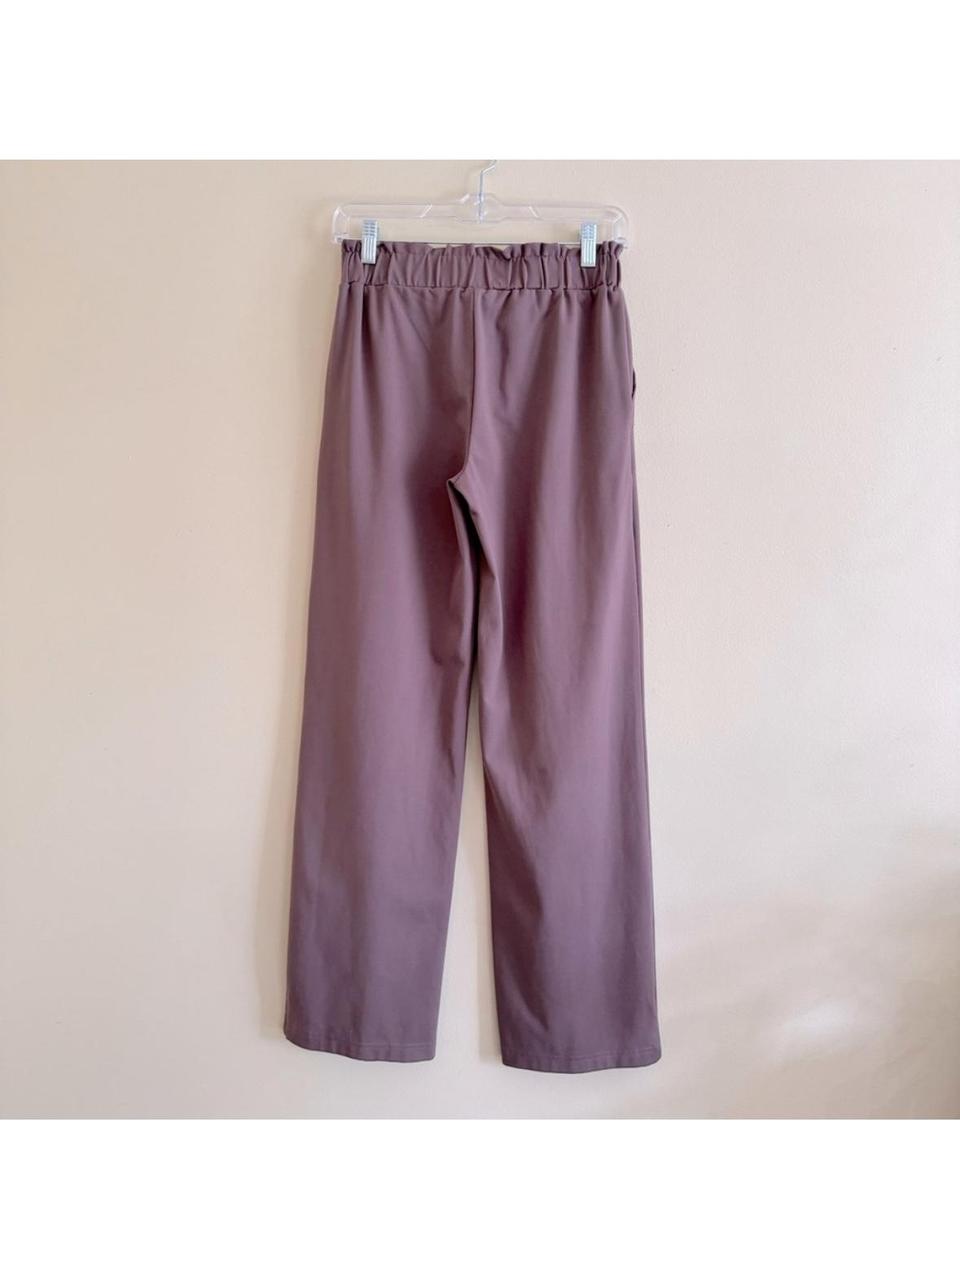 Joie Women's Brown and Purple Trousers (4)